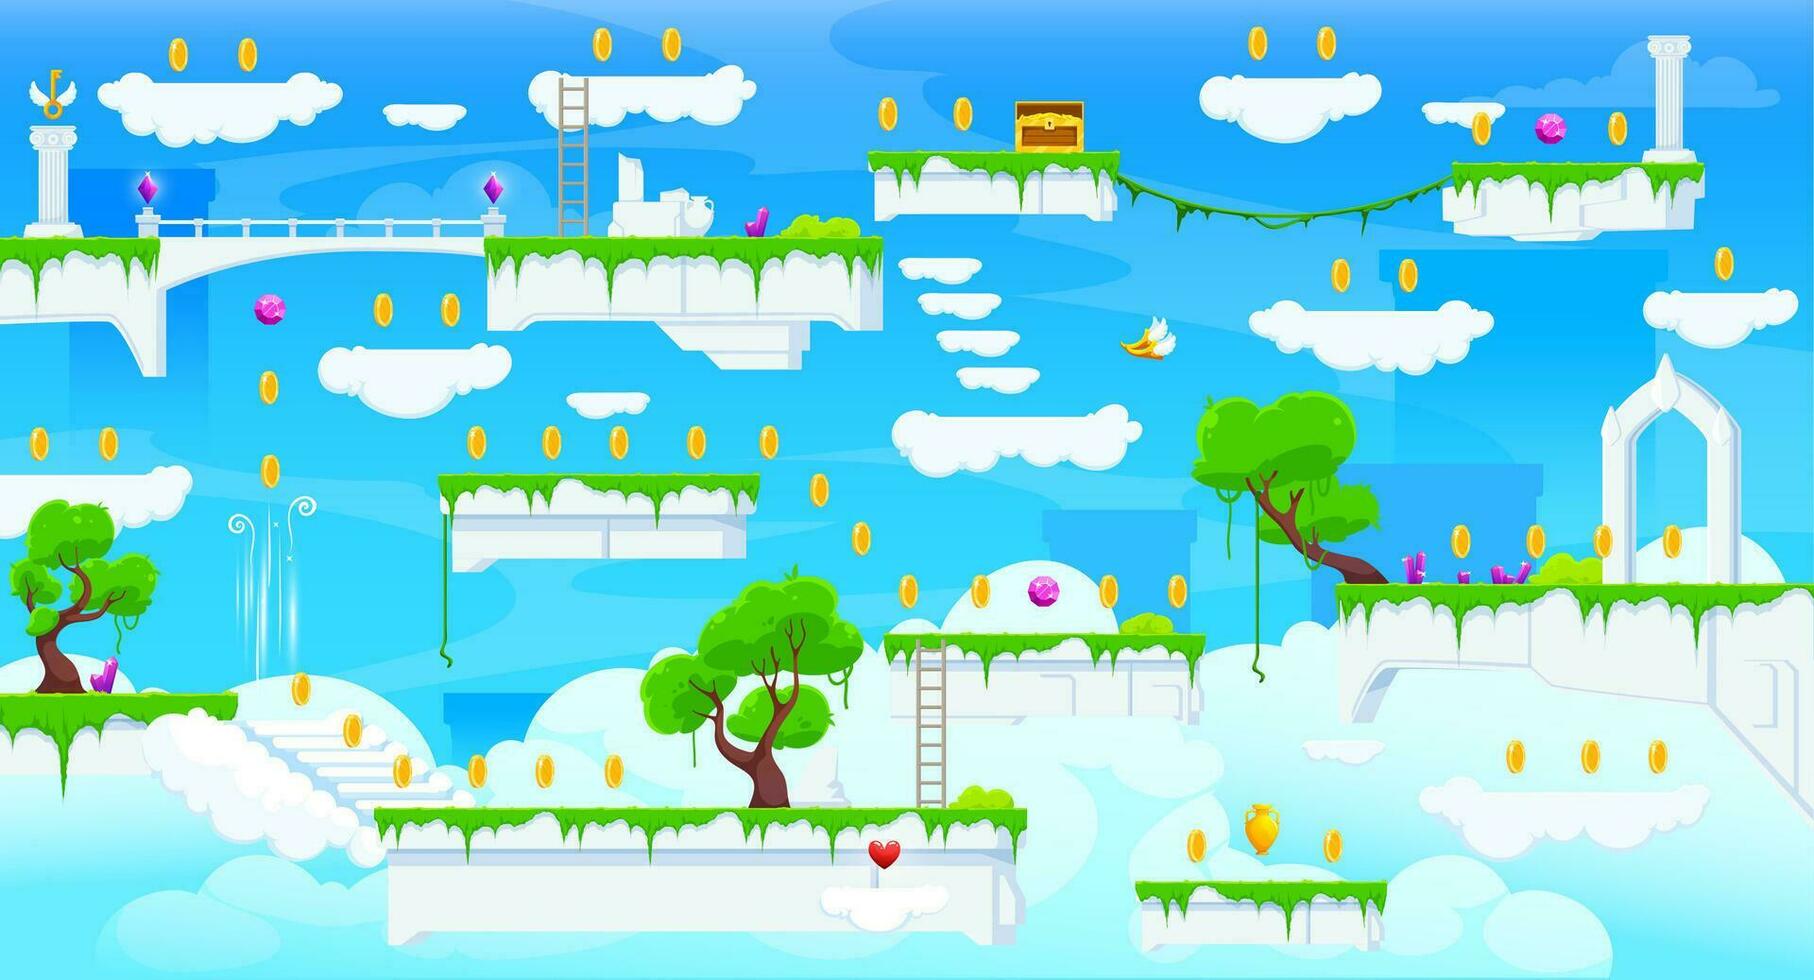 Arcade game level map with ice platforms, ladders vector